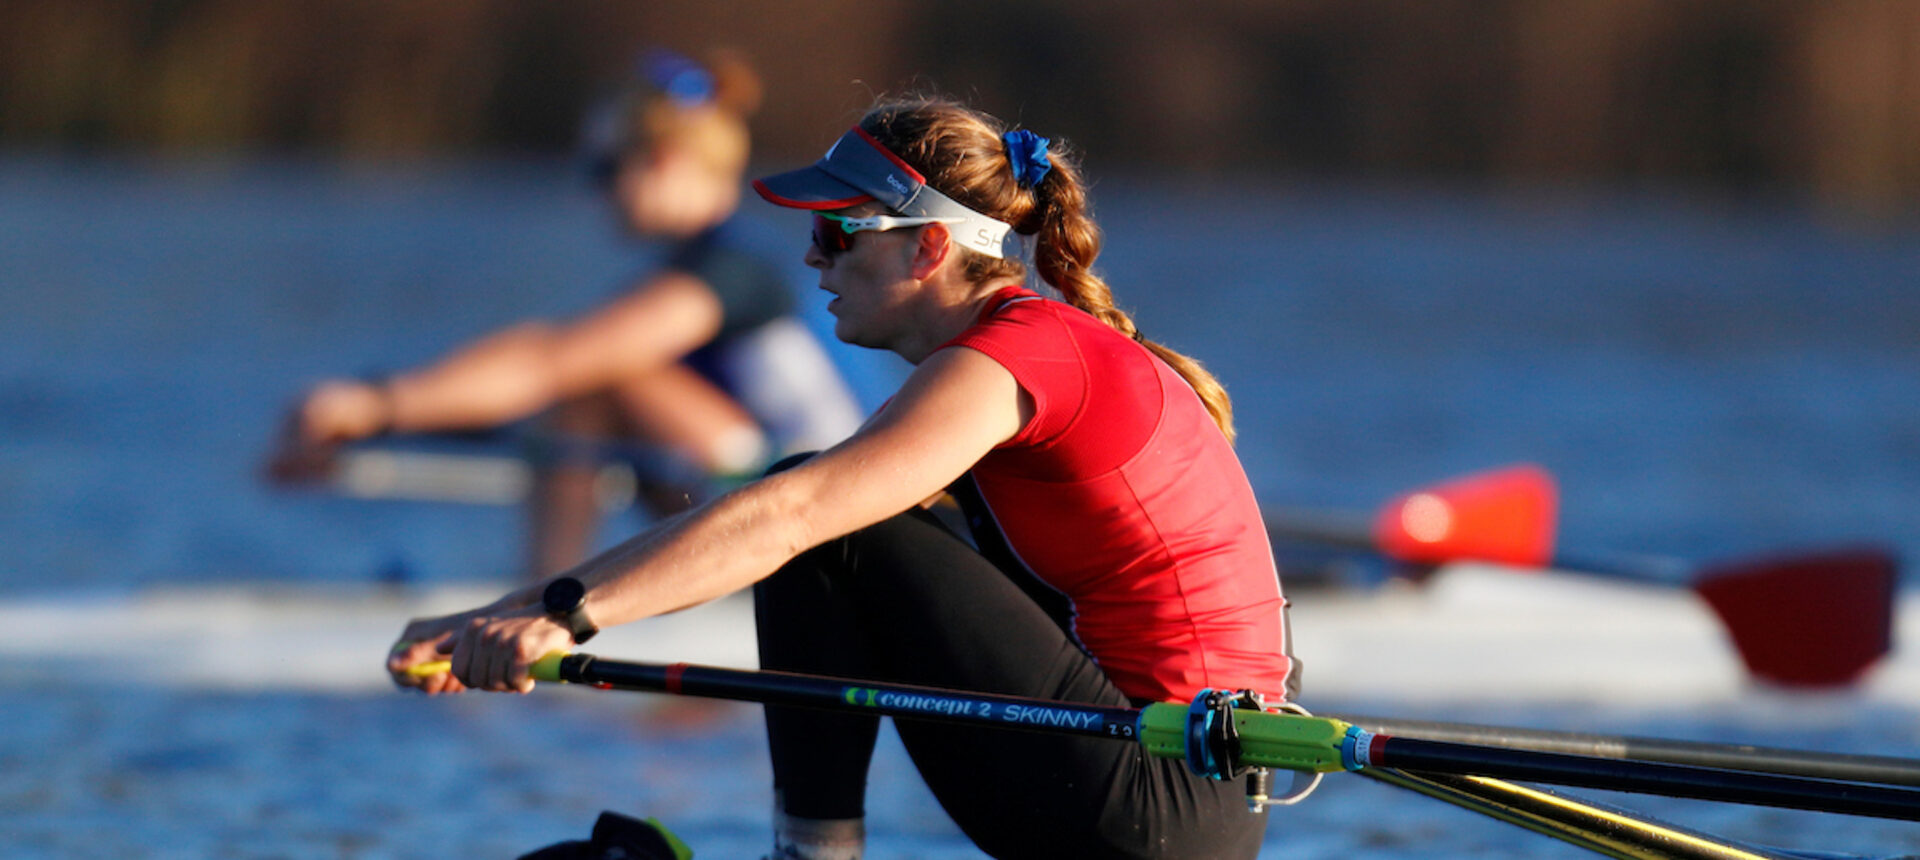 Rowers race to the podium at National Championships